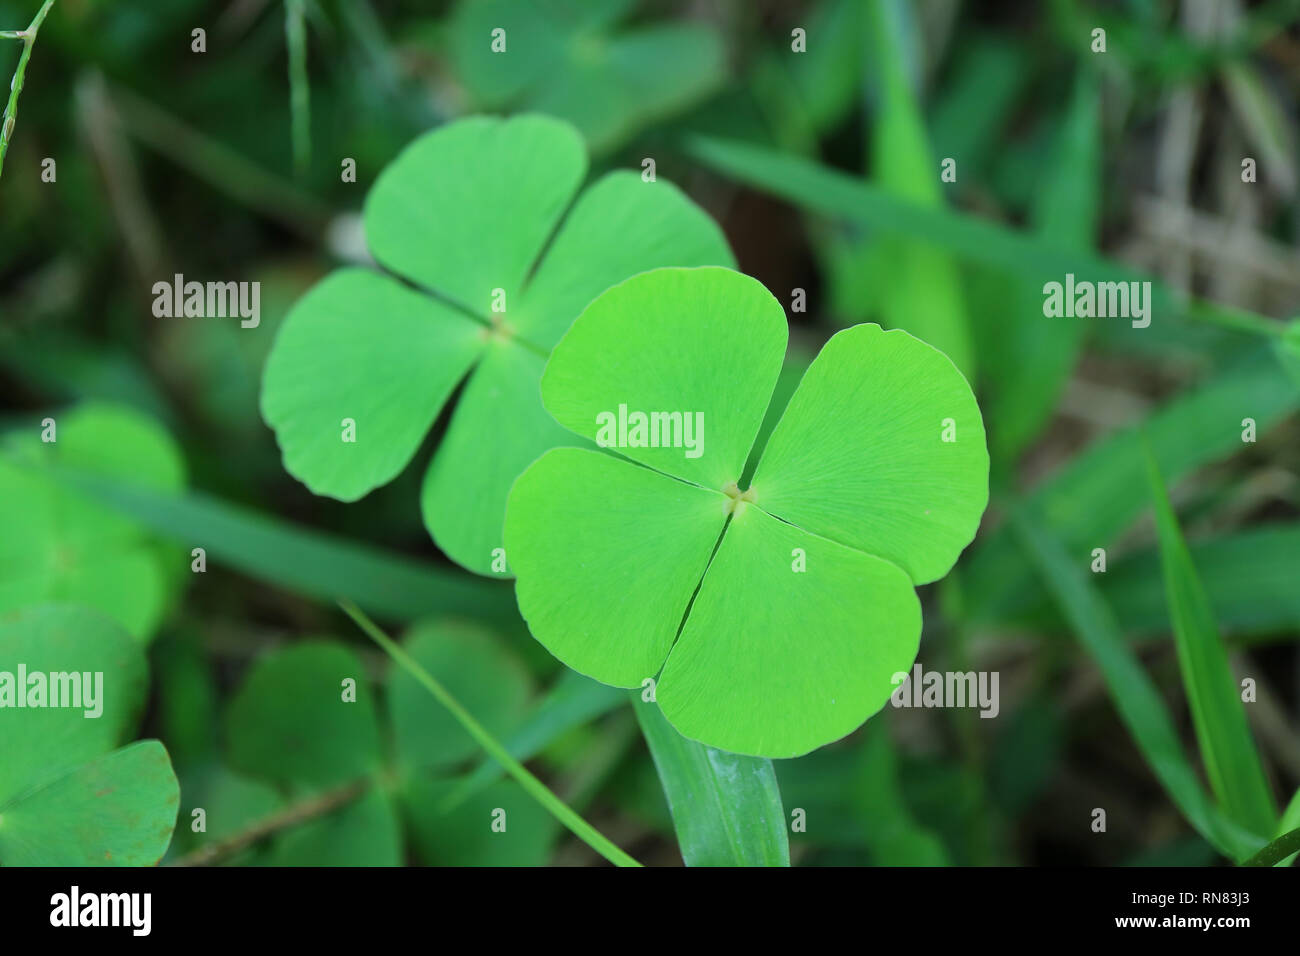 Closed up a Pair of Vibrant Green Four-leaf Clovers in the Field Stock Photo